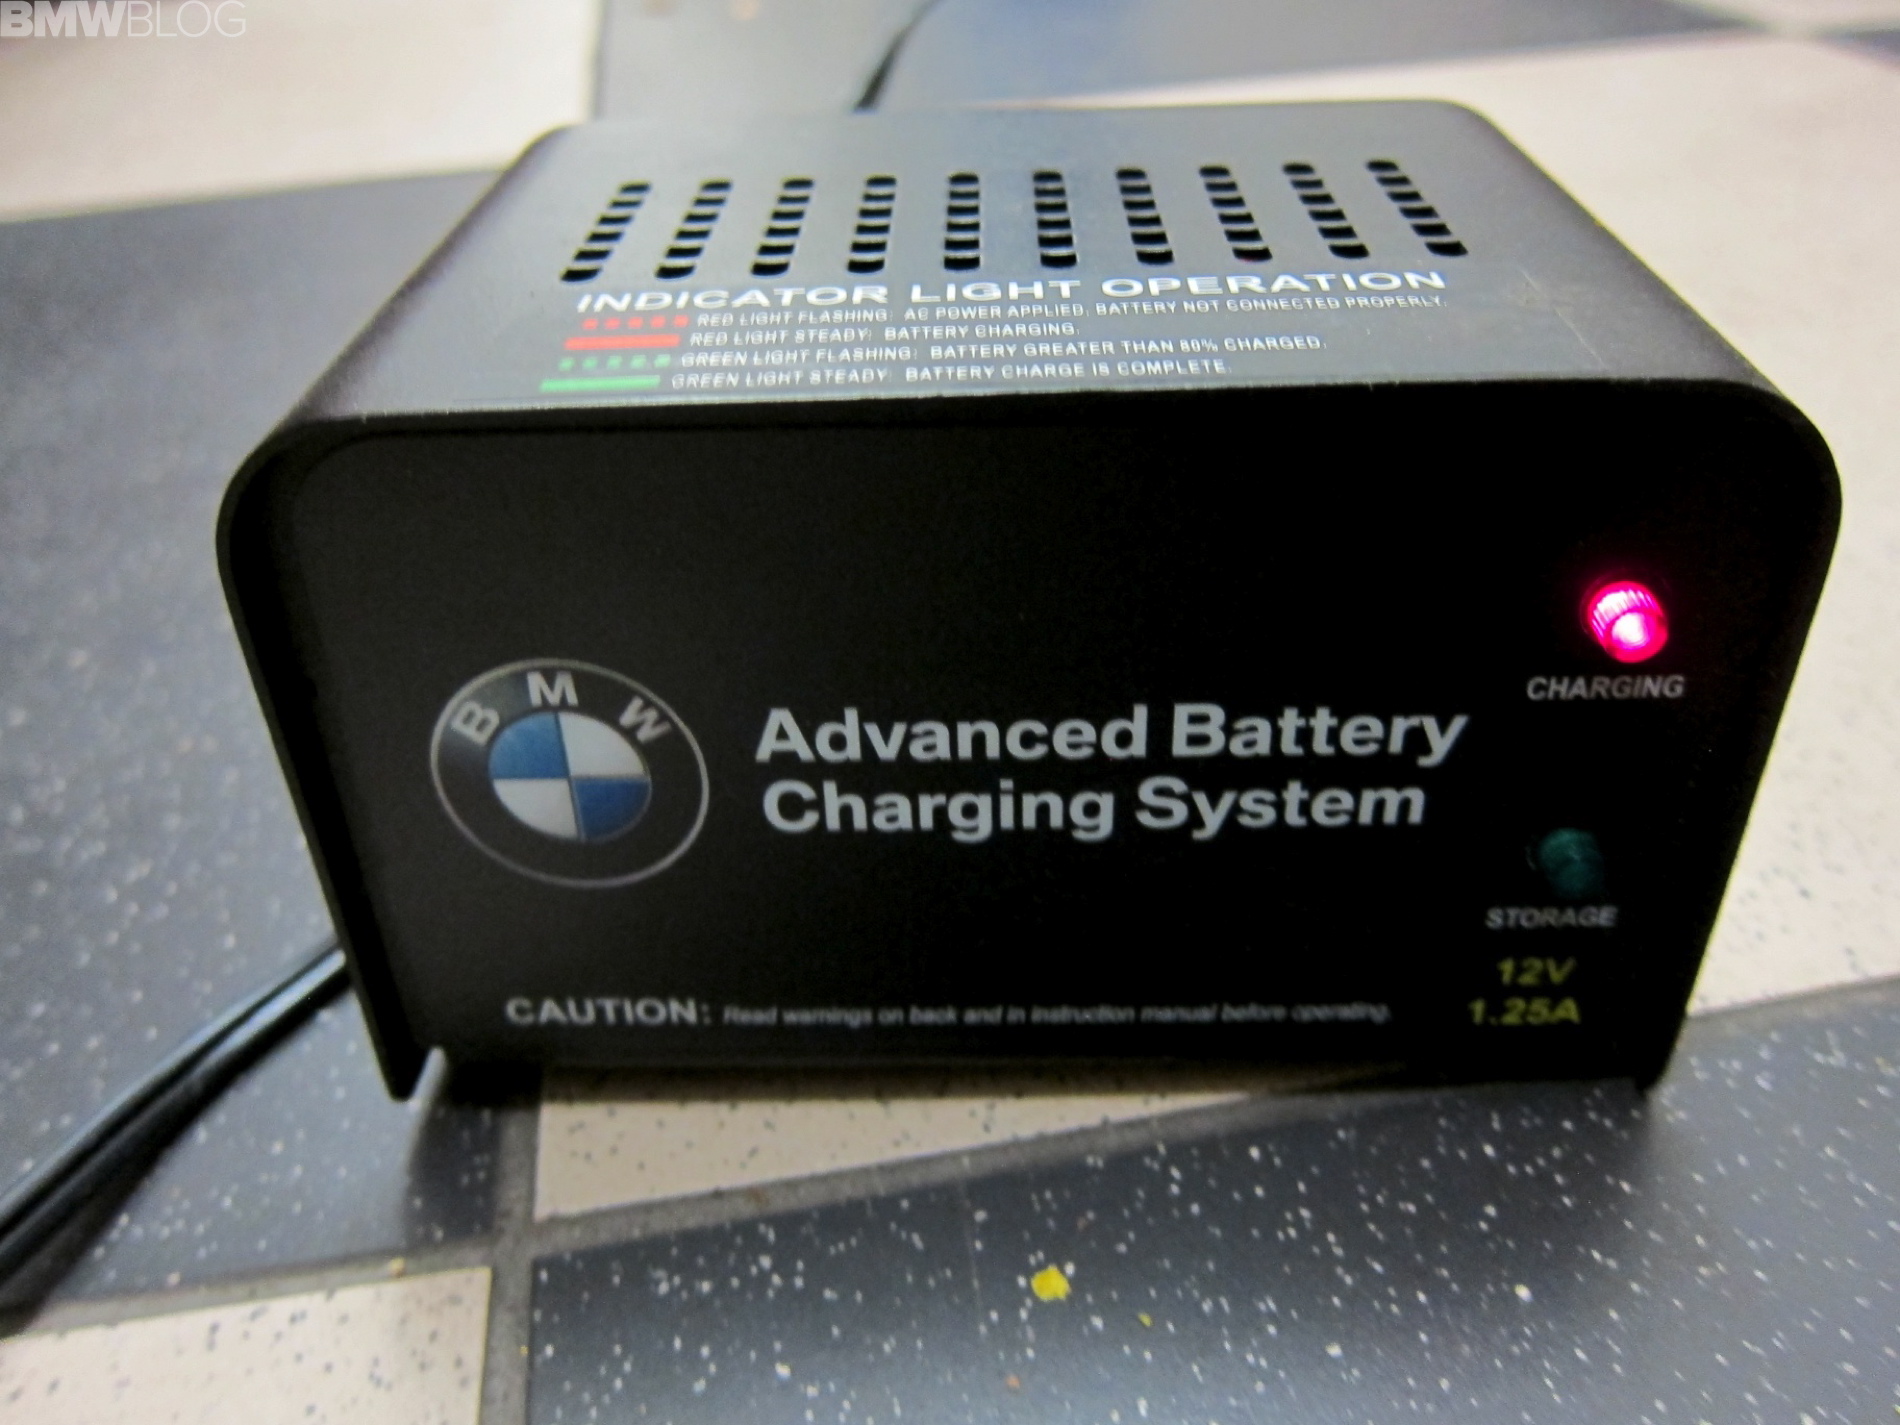 Bmw advanced battery charging system review #7